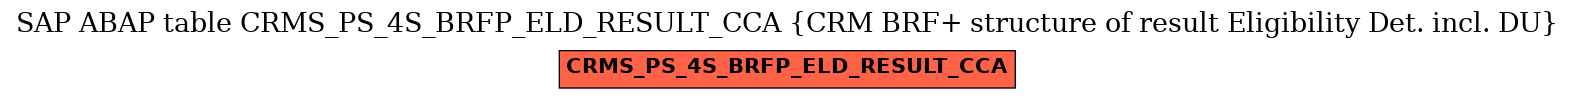 E-R Diagram for table CRMS_PS_4S_BRFP_ELD_RESULT_CCA (CRM BRF+ structure of result Eligibility Det. incl. DU)